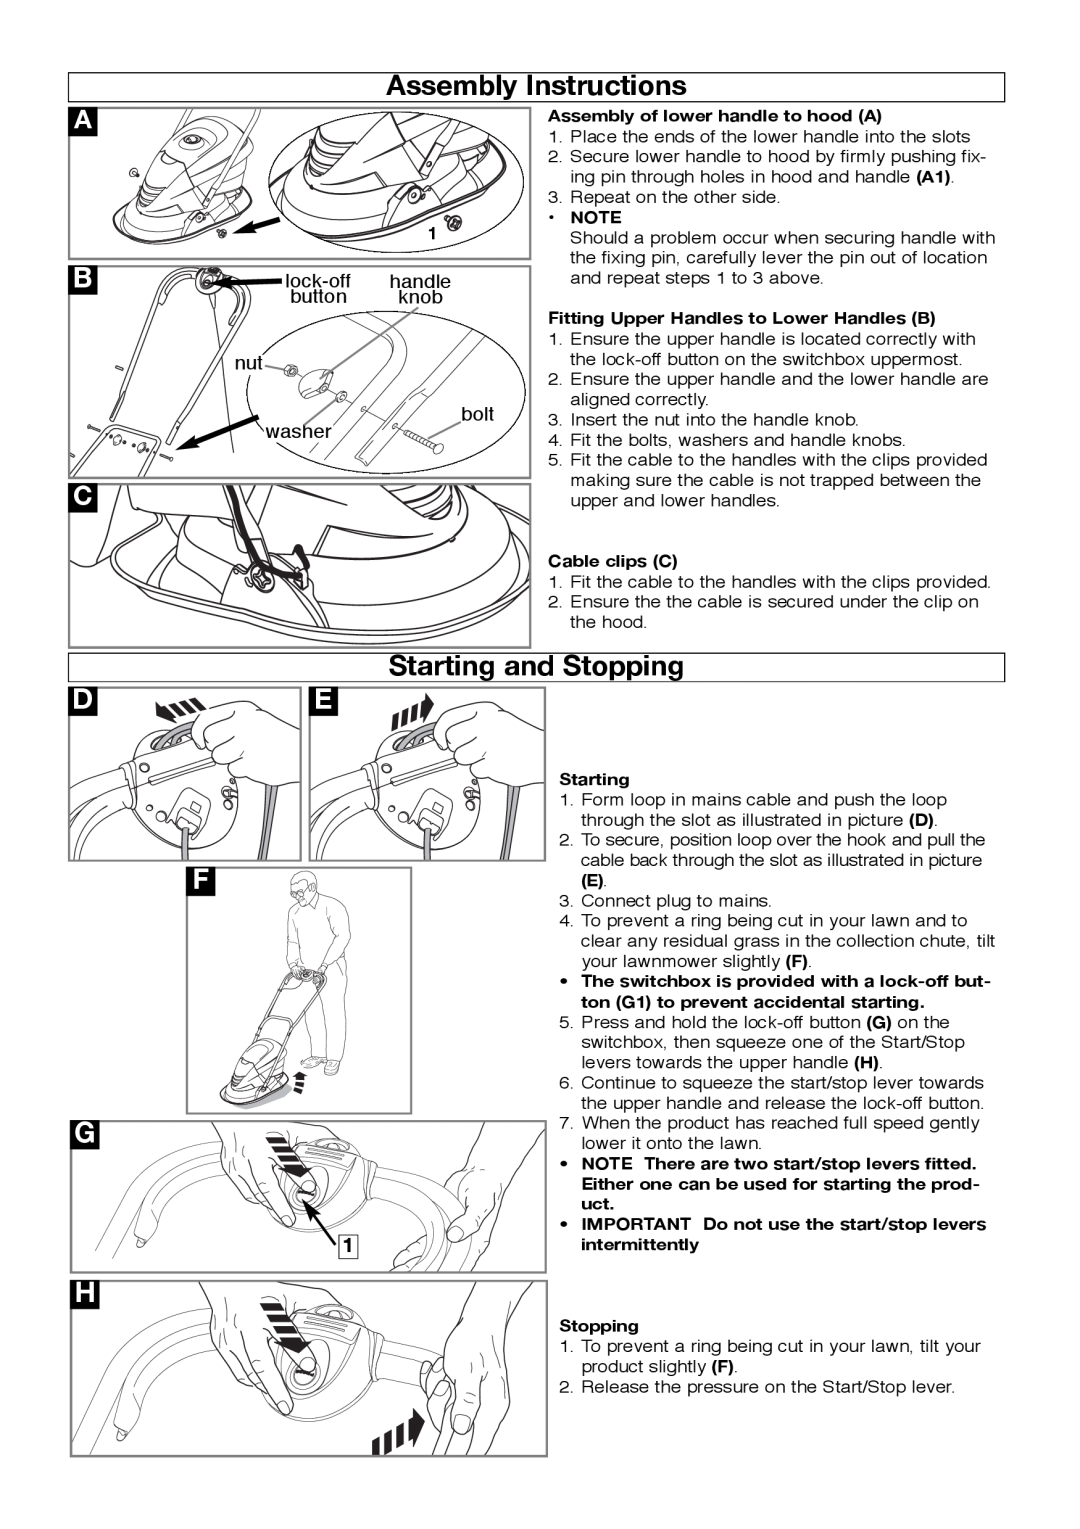 Flymo Trmmer Assembly Instructions, Starting and Stopping, Assembly of lower handle to hood A, Cable clips C, lock-off 